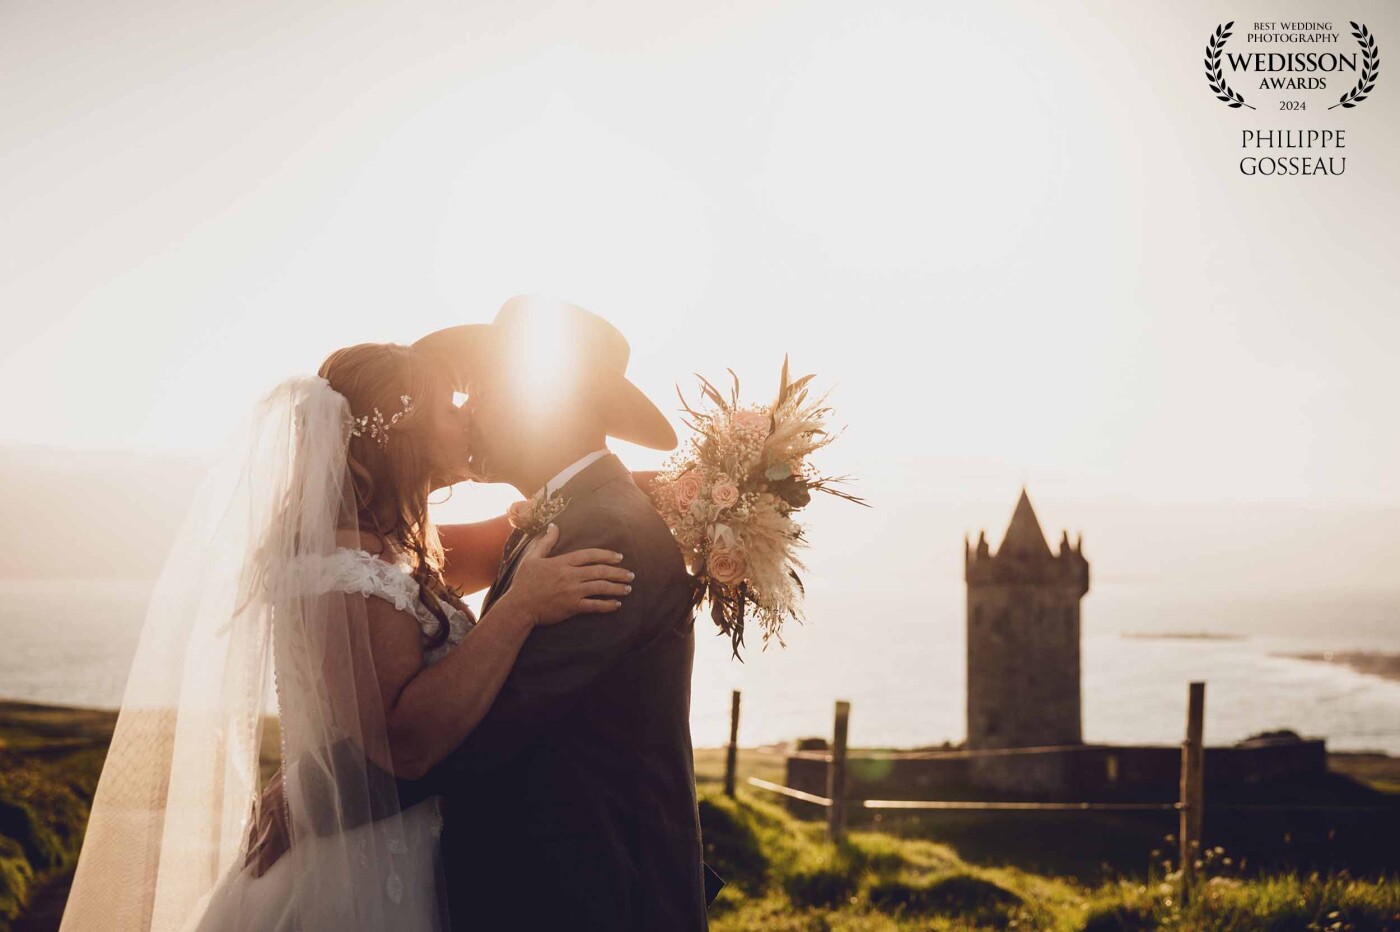 Arena & Brian's  Stunning Sunset Elopement at The Cliffs of Moher in Ireland. A fantastic day  for this American couple who picked Ireland as the dream location for their wedding .